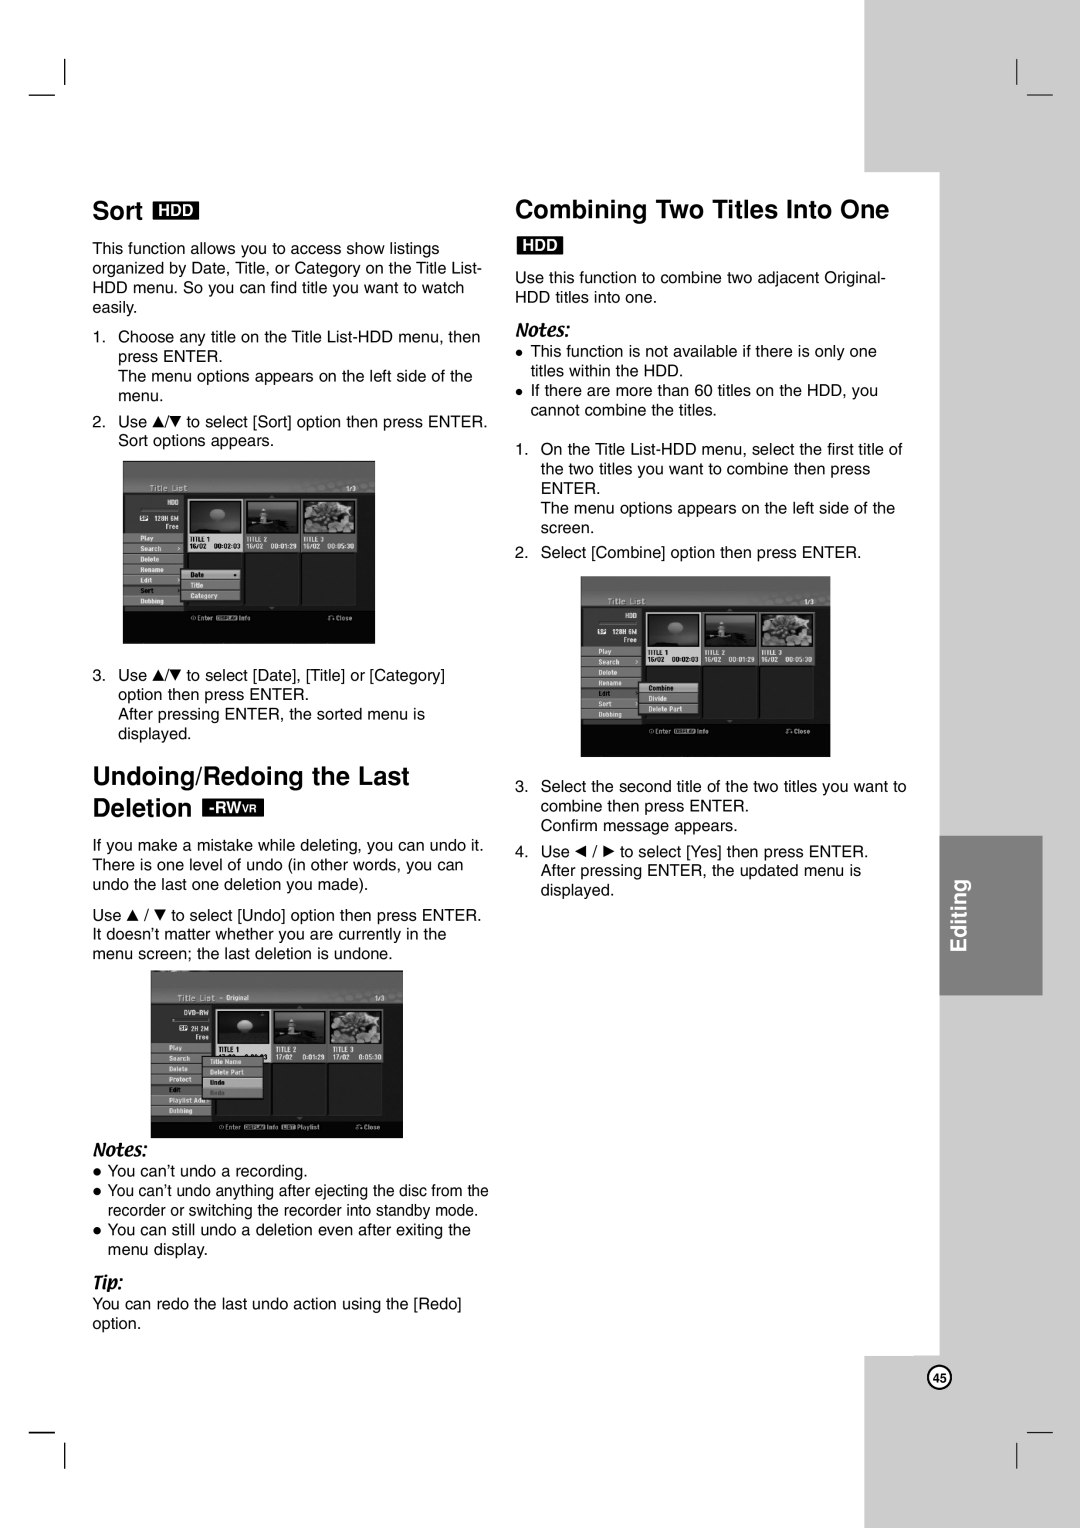 NEC NDH-81 owner manual Sort HDD, Undoing/Redoing the Last Deletion -RWVR, Combining Two Titles Into One, Editing 